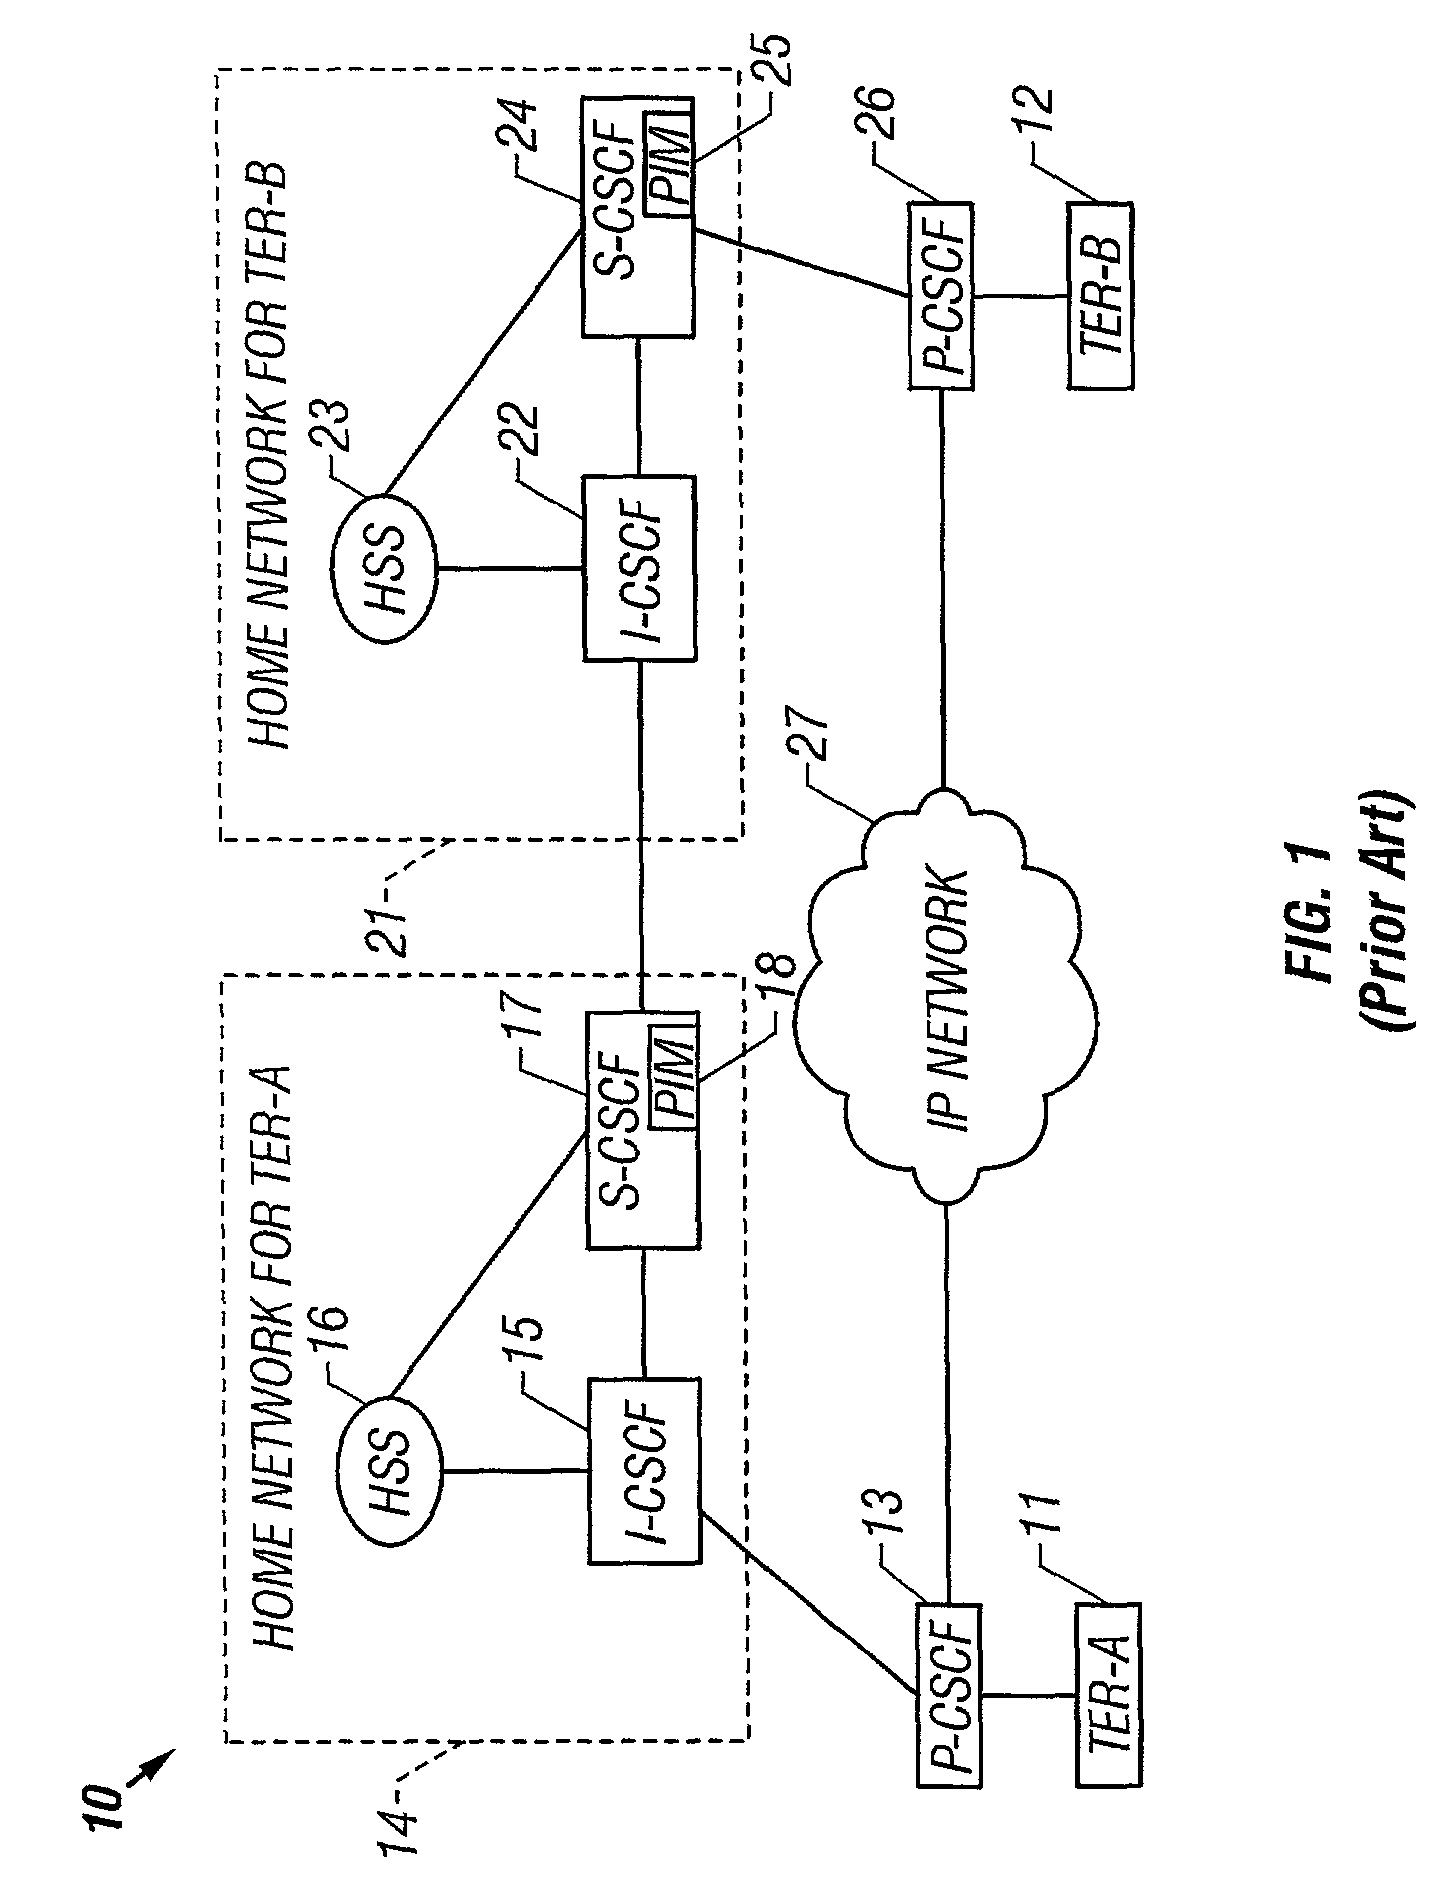 Communications node architecture and method for providing control functions in a telecommunications network